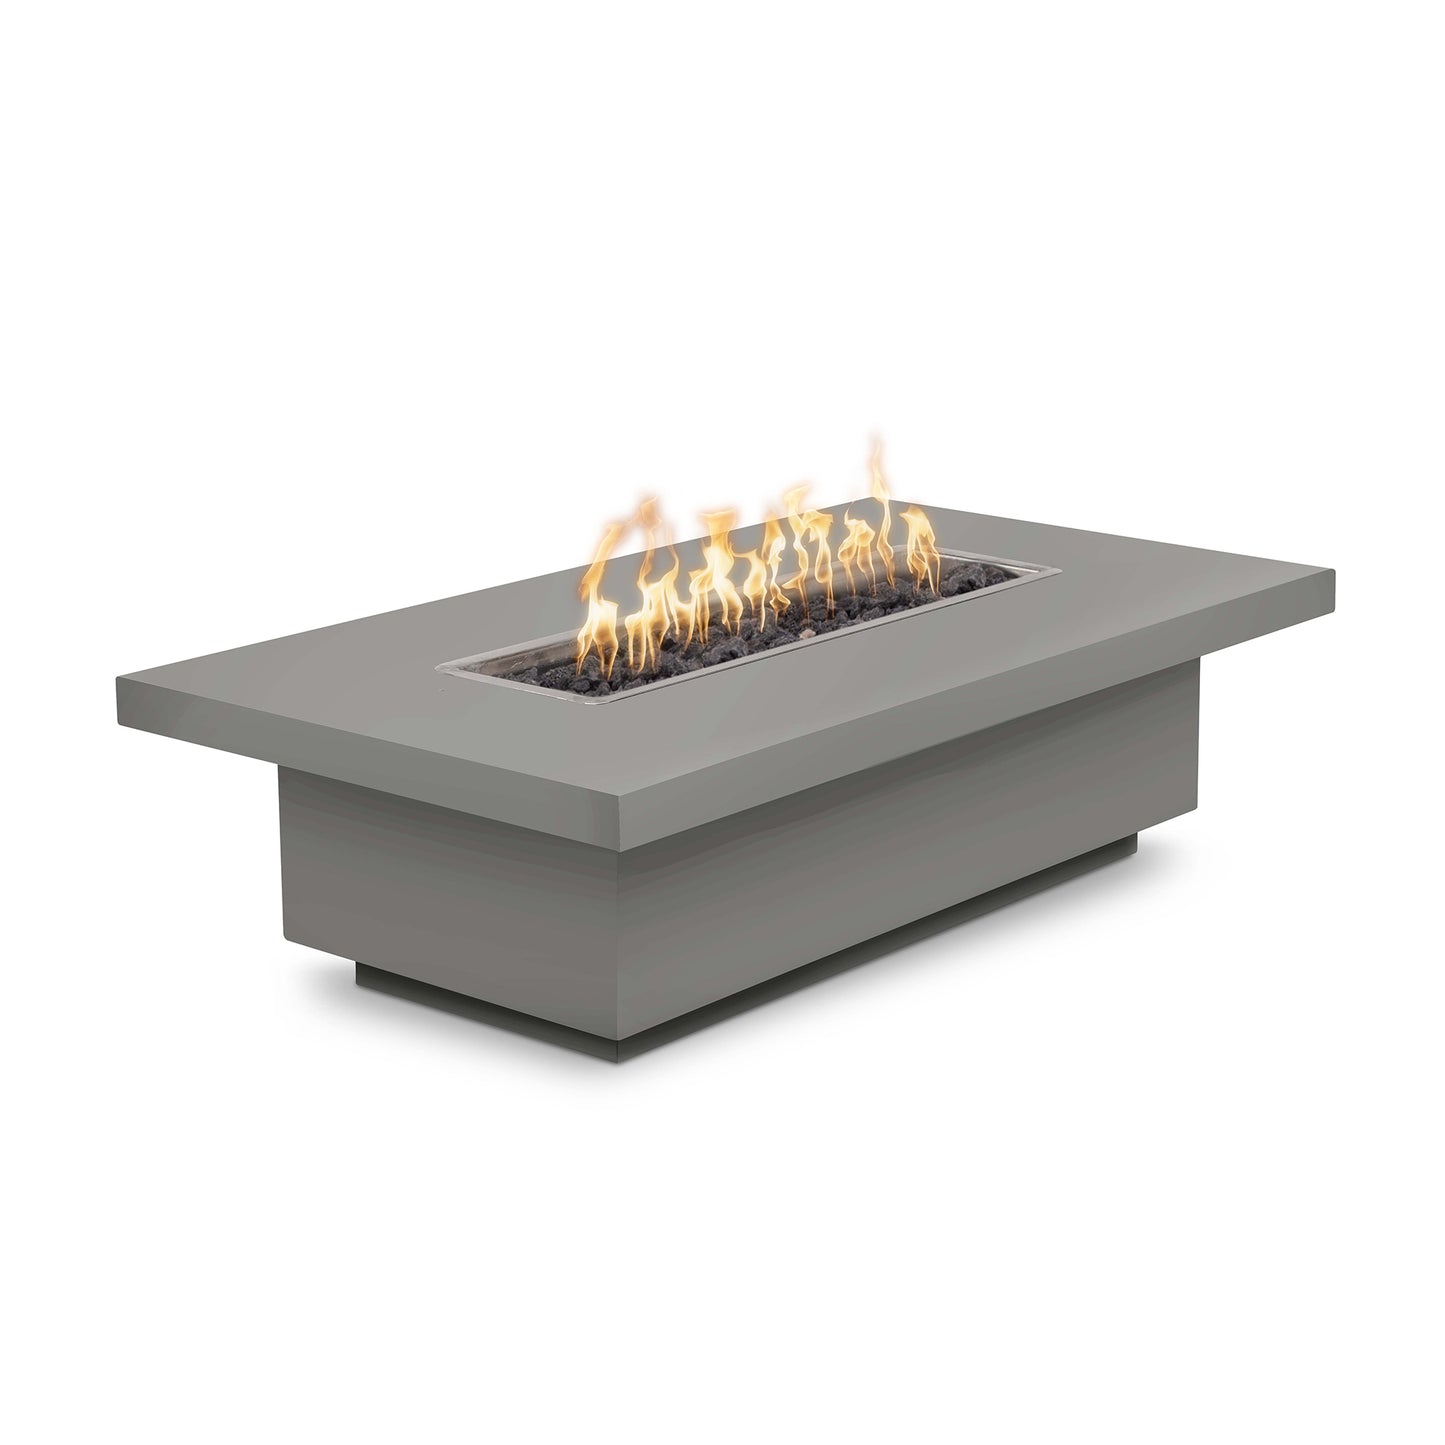 Fremont Fire Pit Table 60" - Low Profile - Electronic Ignition